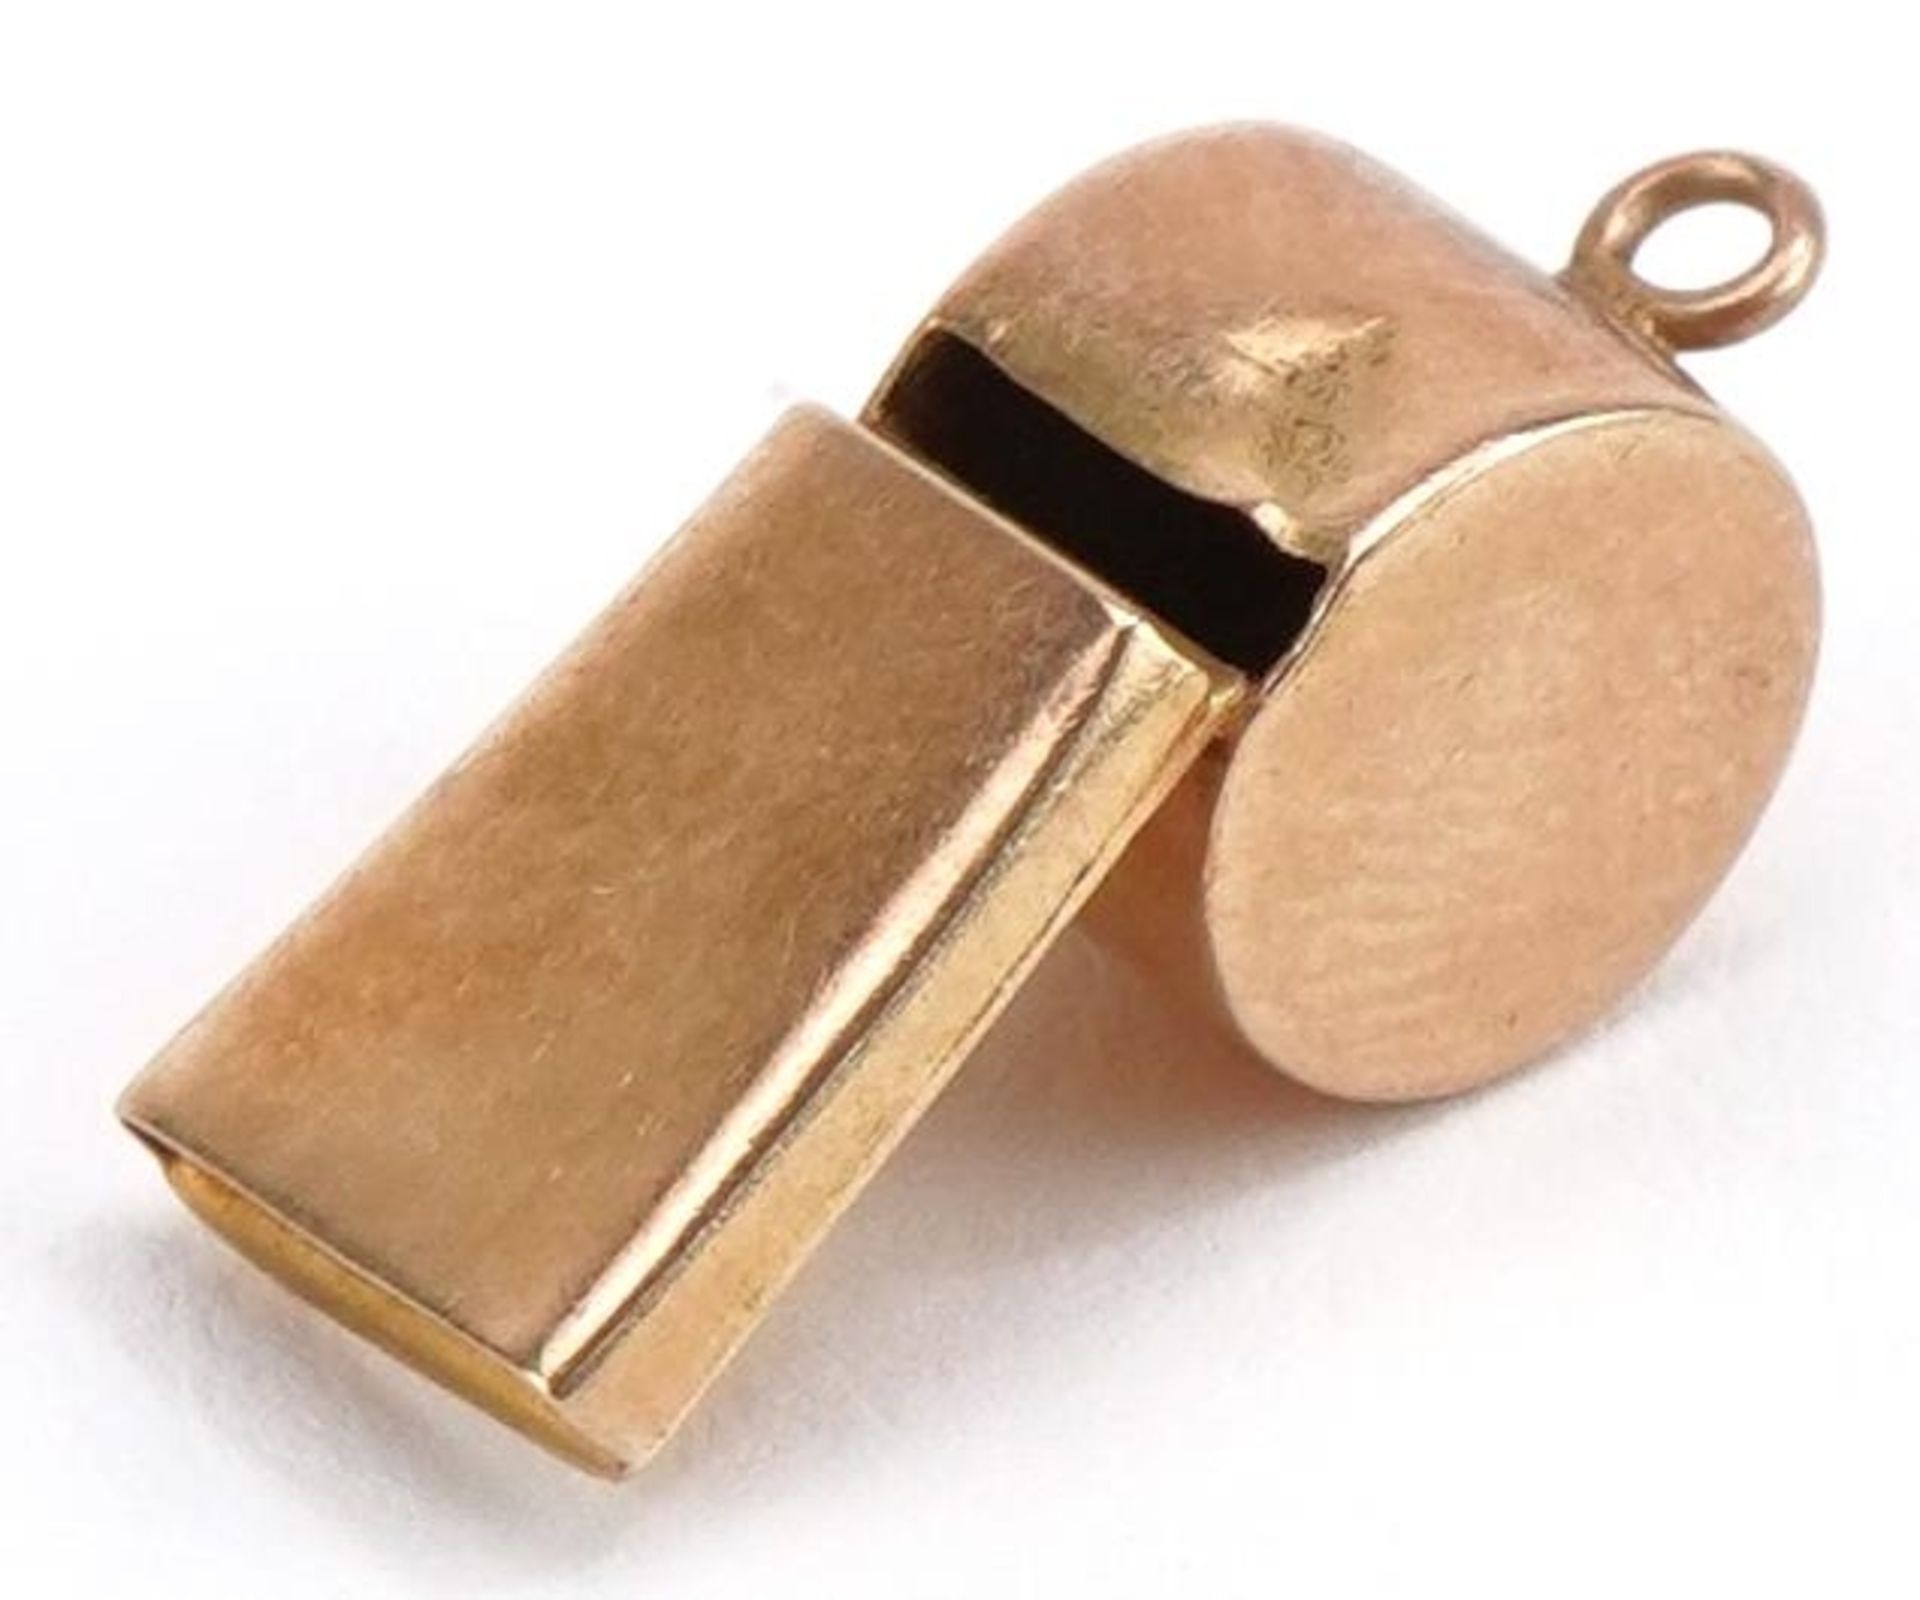 9ct gold whistle charm, 1.8cm high, 0.9g